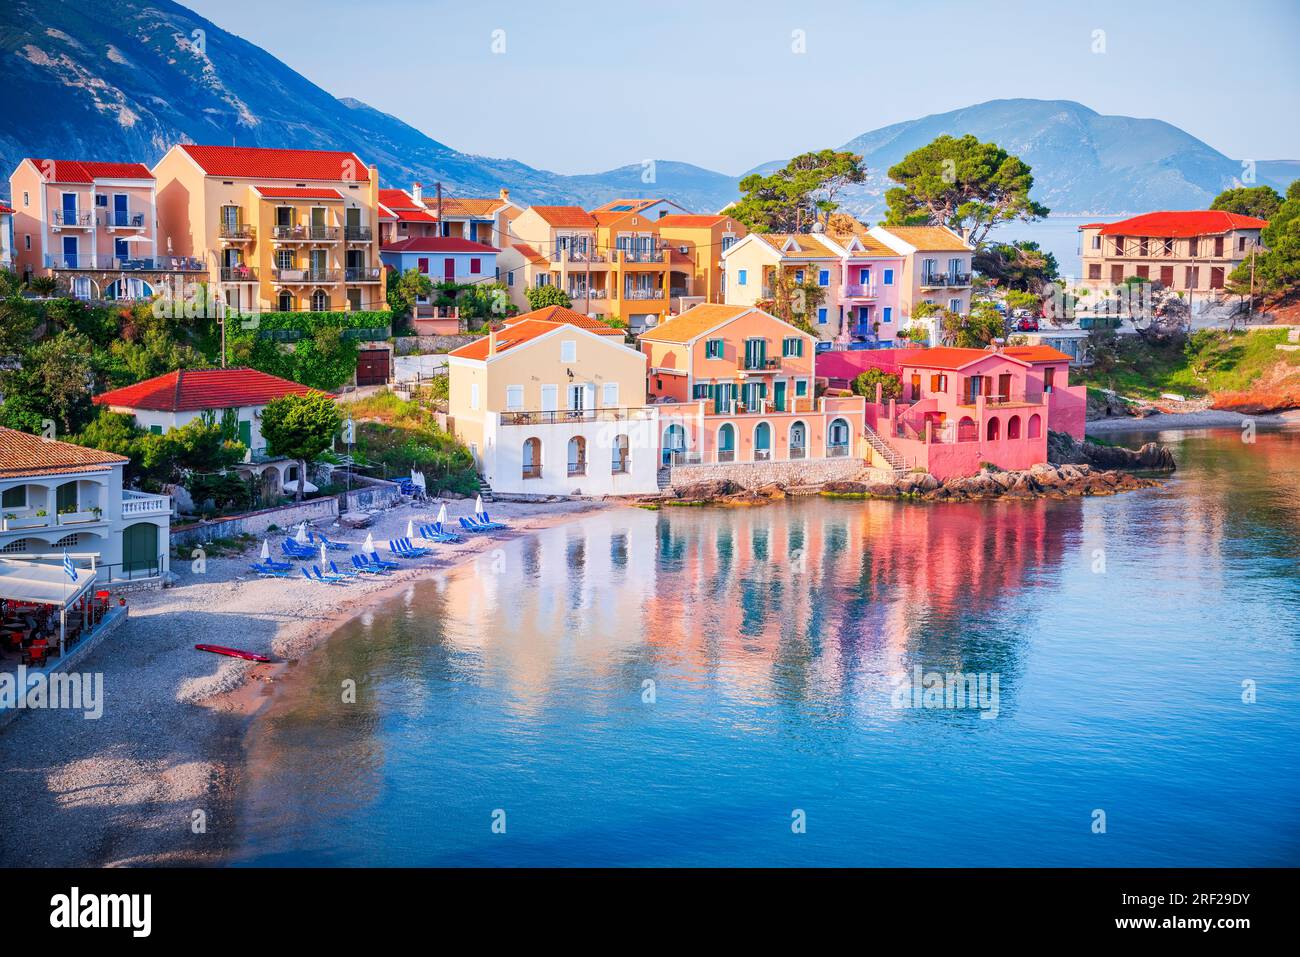 Assos, Greece. Sunrise in Kefalonia, picturesque village nestled on the idyllic Ionian islands. Beautiful colorful houses and turquoise colored bay. Stock Photo